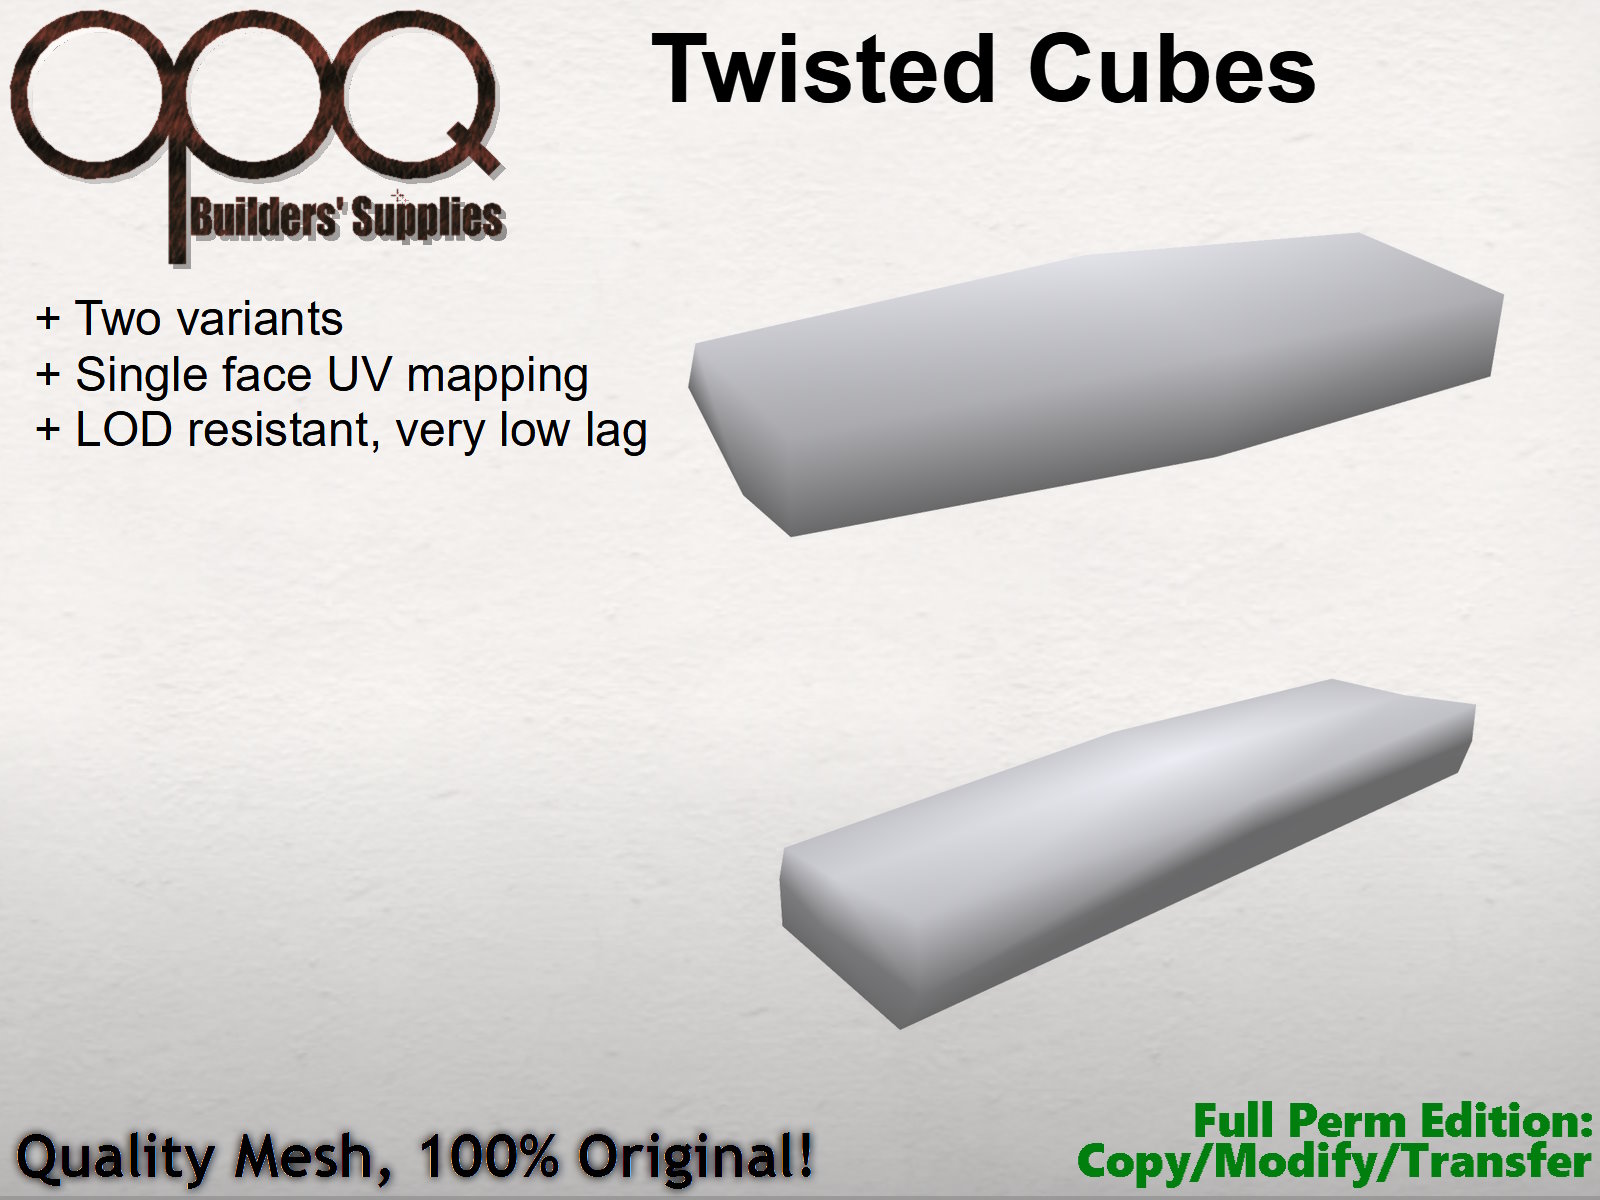 OPQ Twisted Cubes Poster.jpg